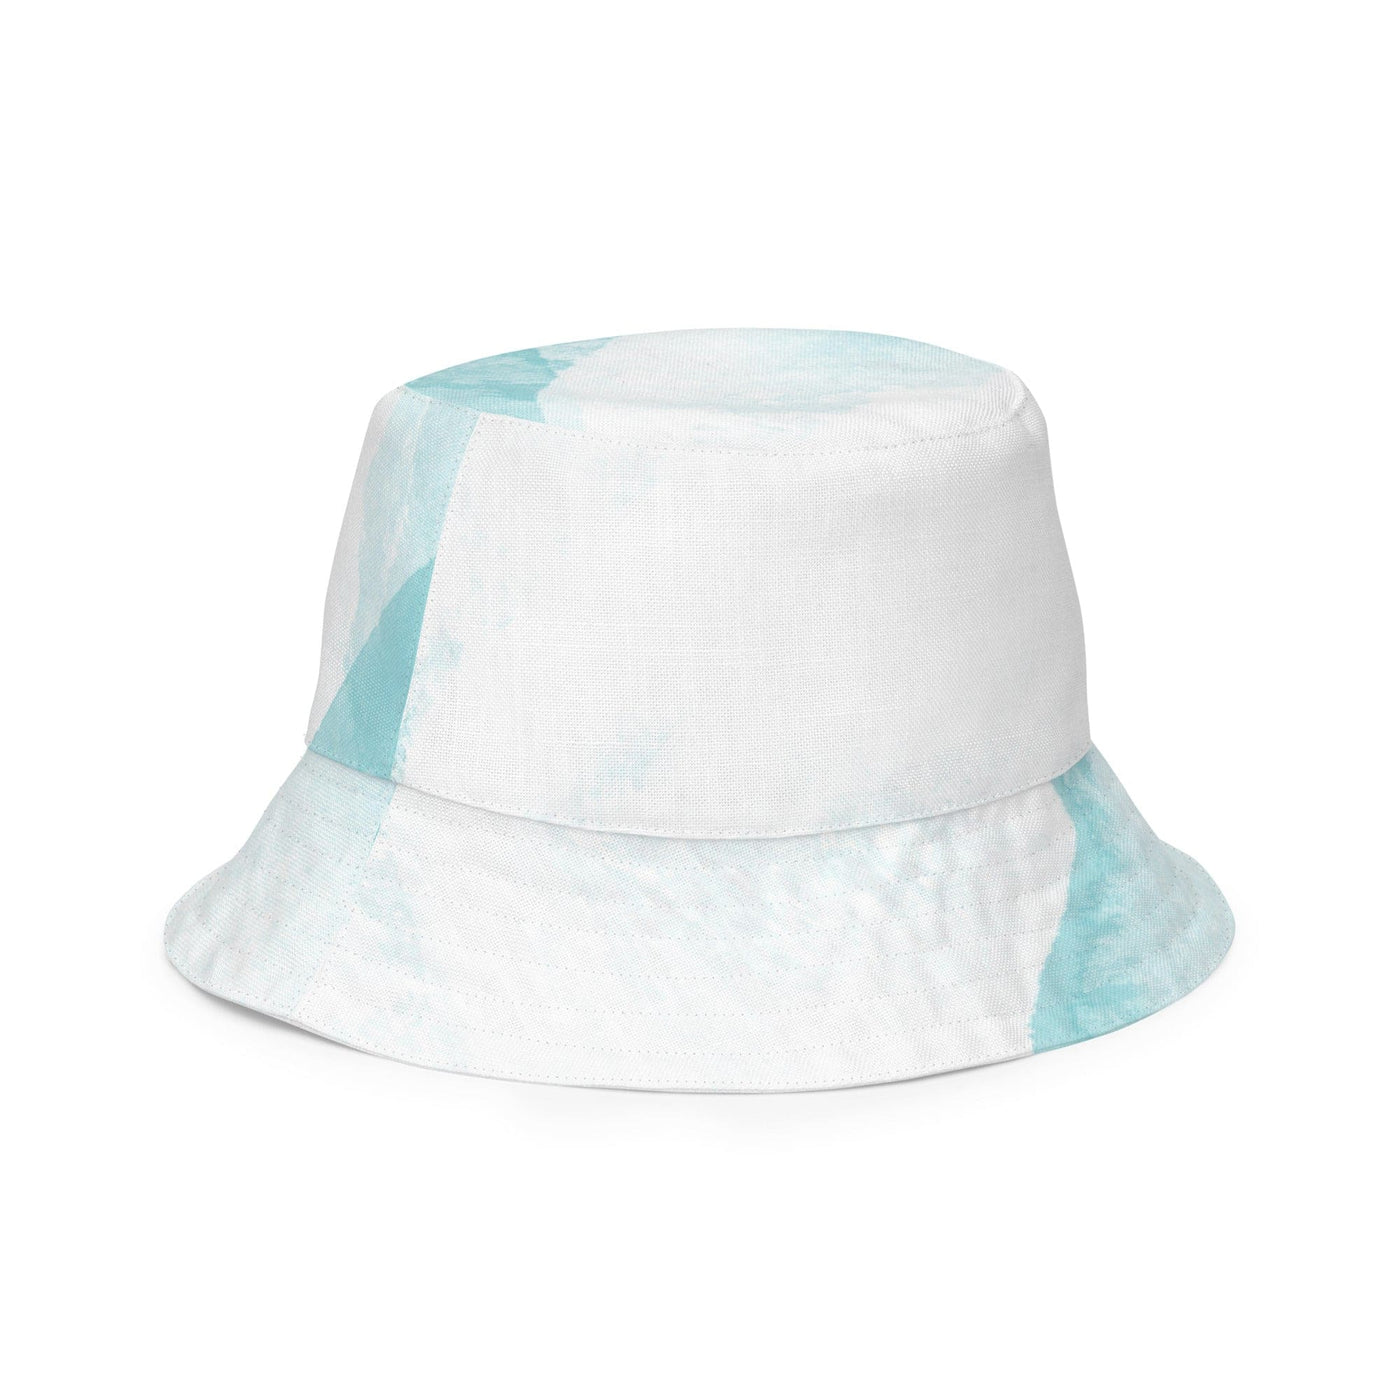 Reversible Bucket Hat Subtle Abstract Ocean Blue And White Print - Unisex